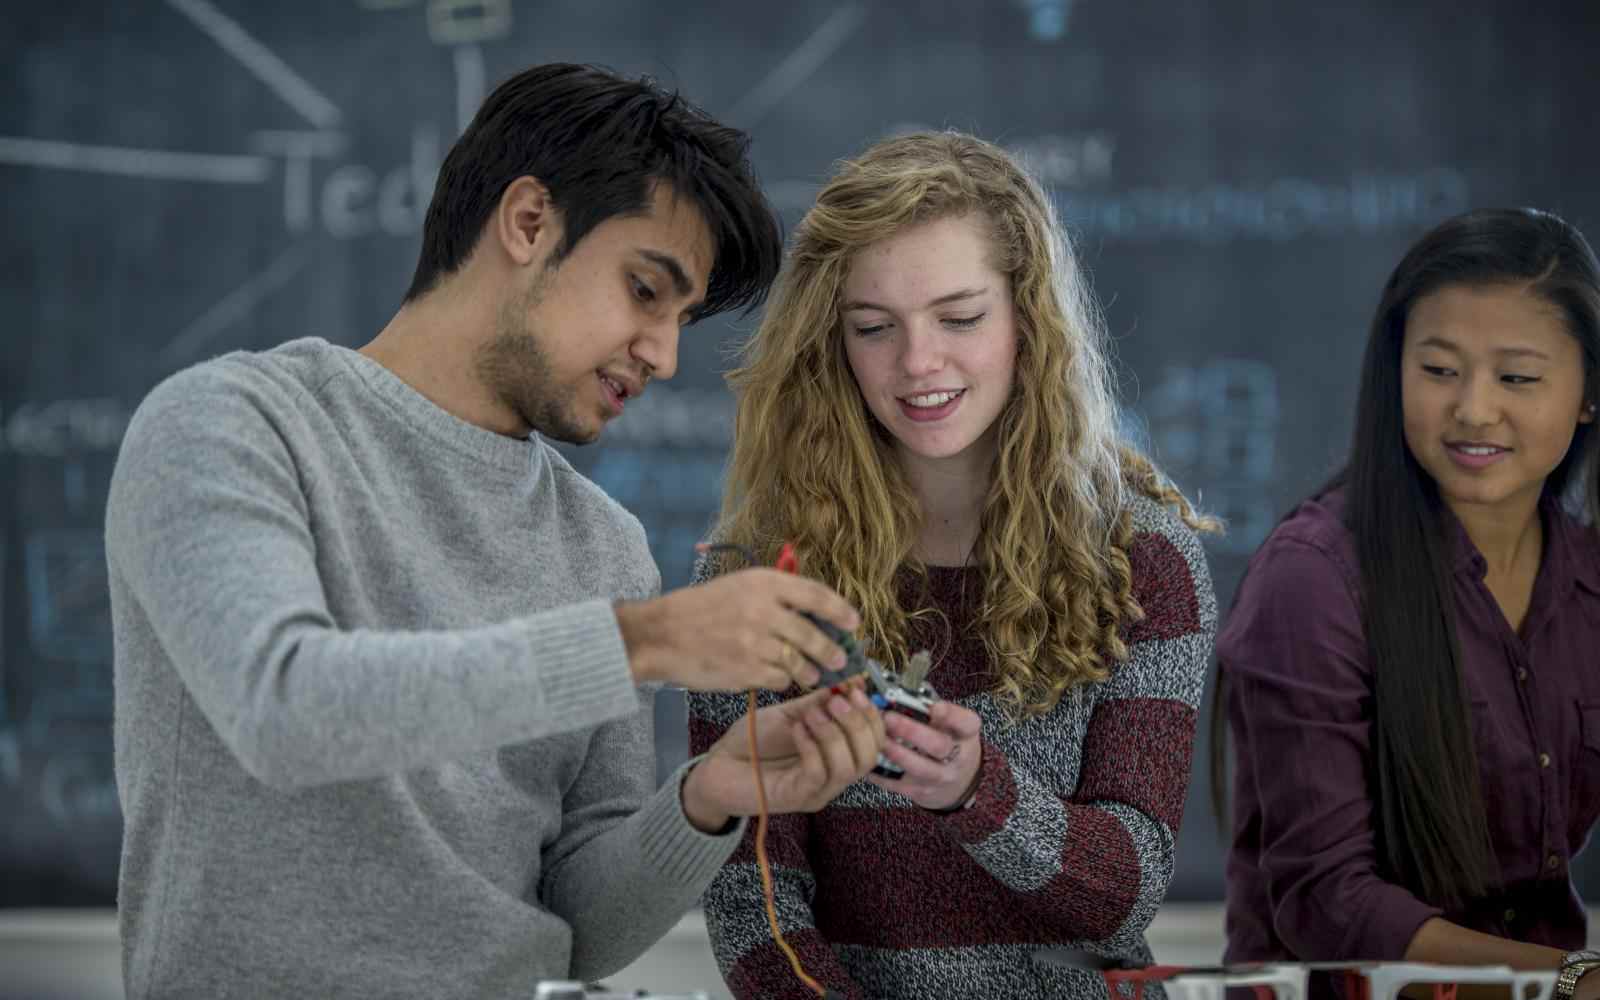 Two teens work together on a robotics project in science class